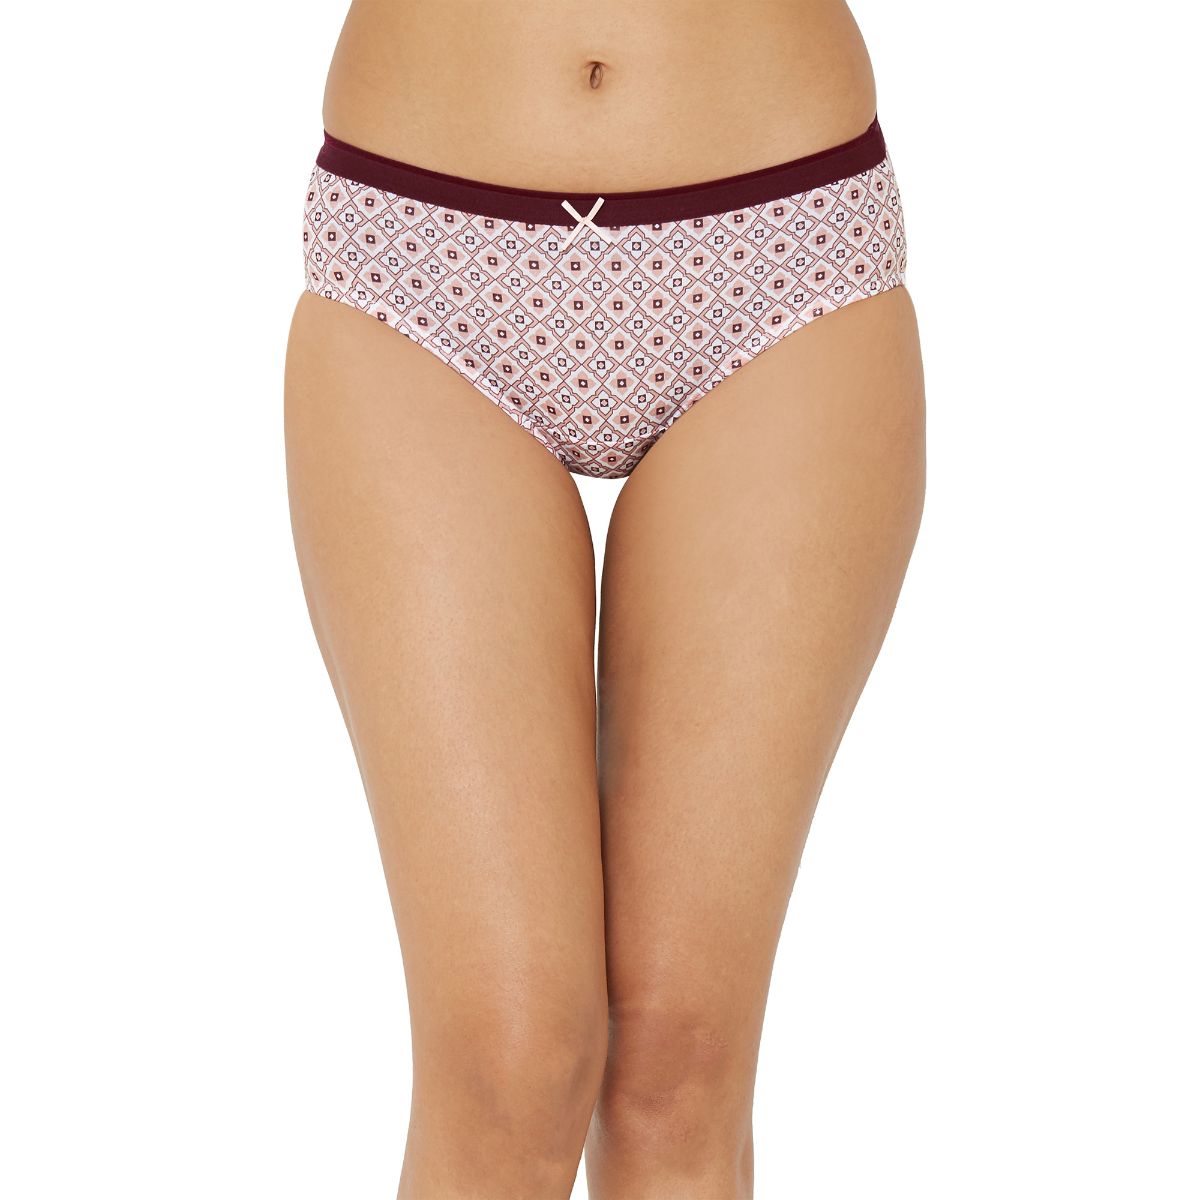 High Rise Full Coverage Solid and Printed Cotton Stretch Hipster Panty (Pack of 6)- 6FCB-21